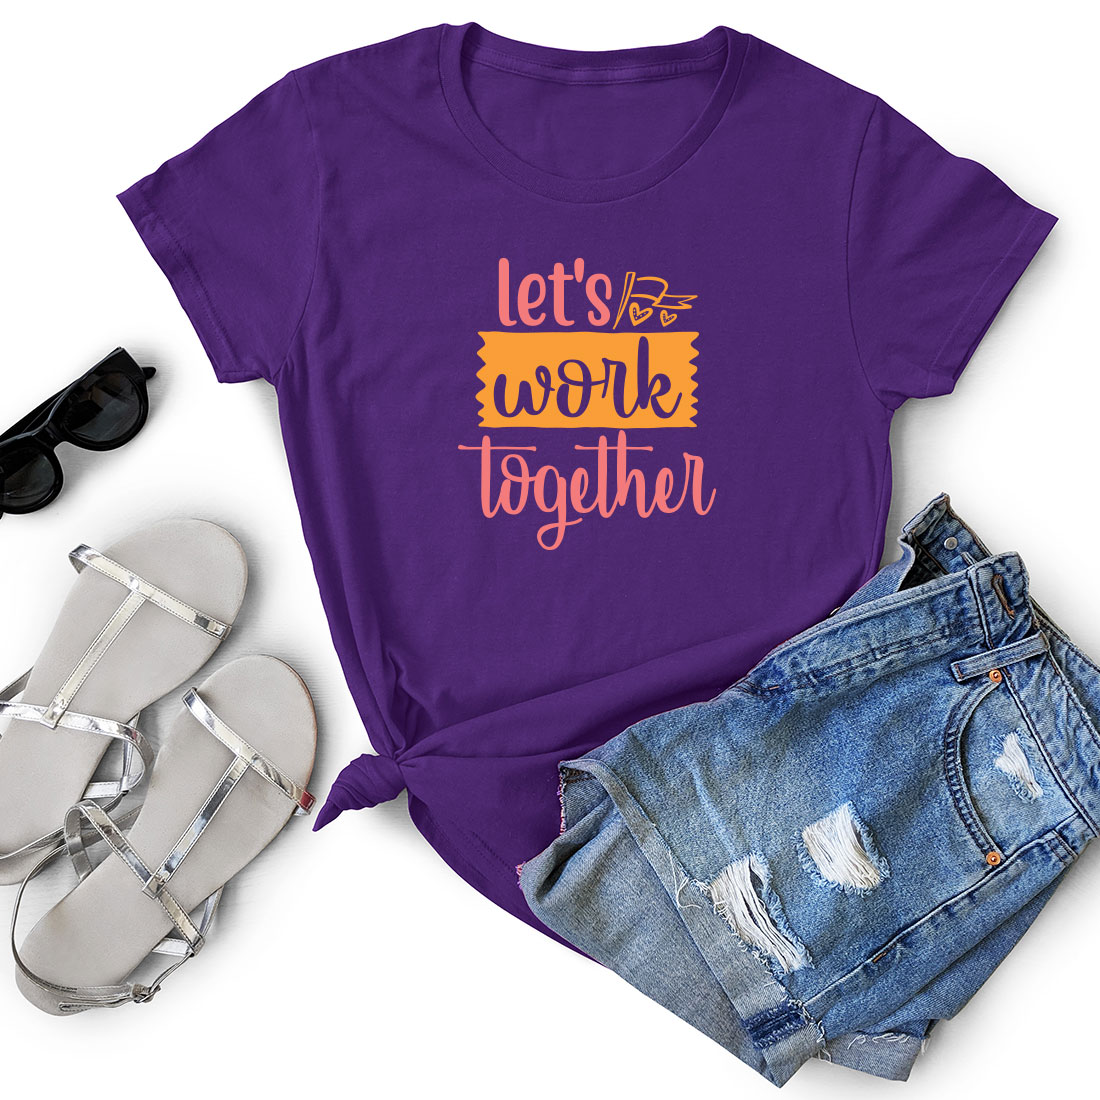 Purple shirt that says let's work together.